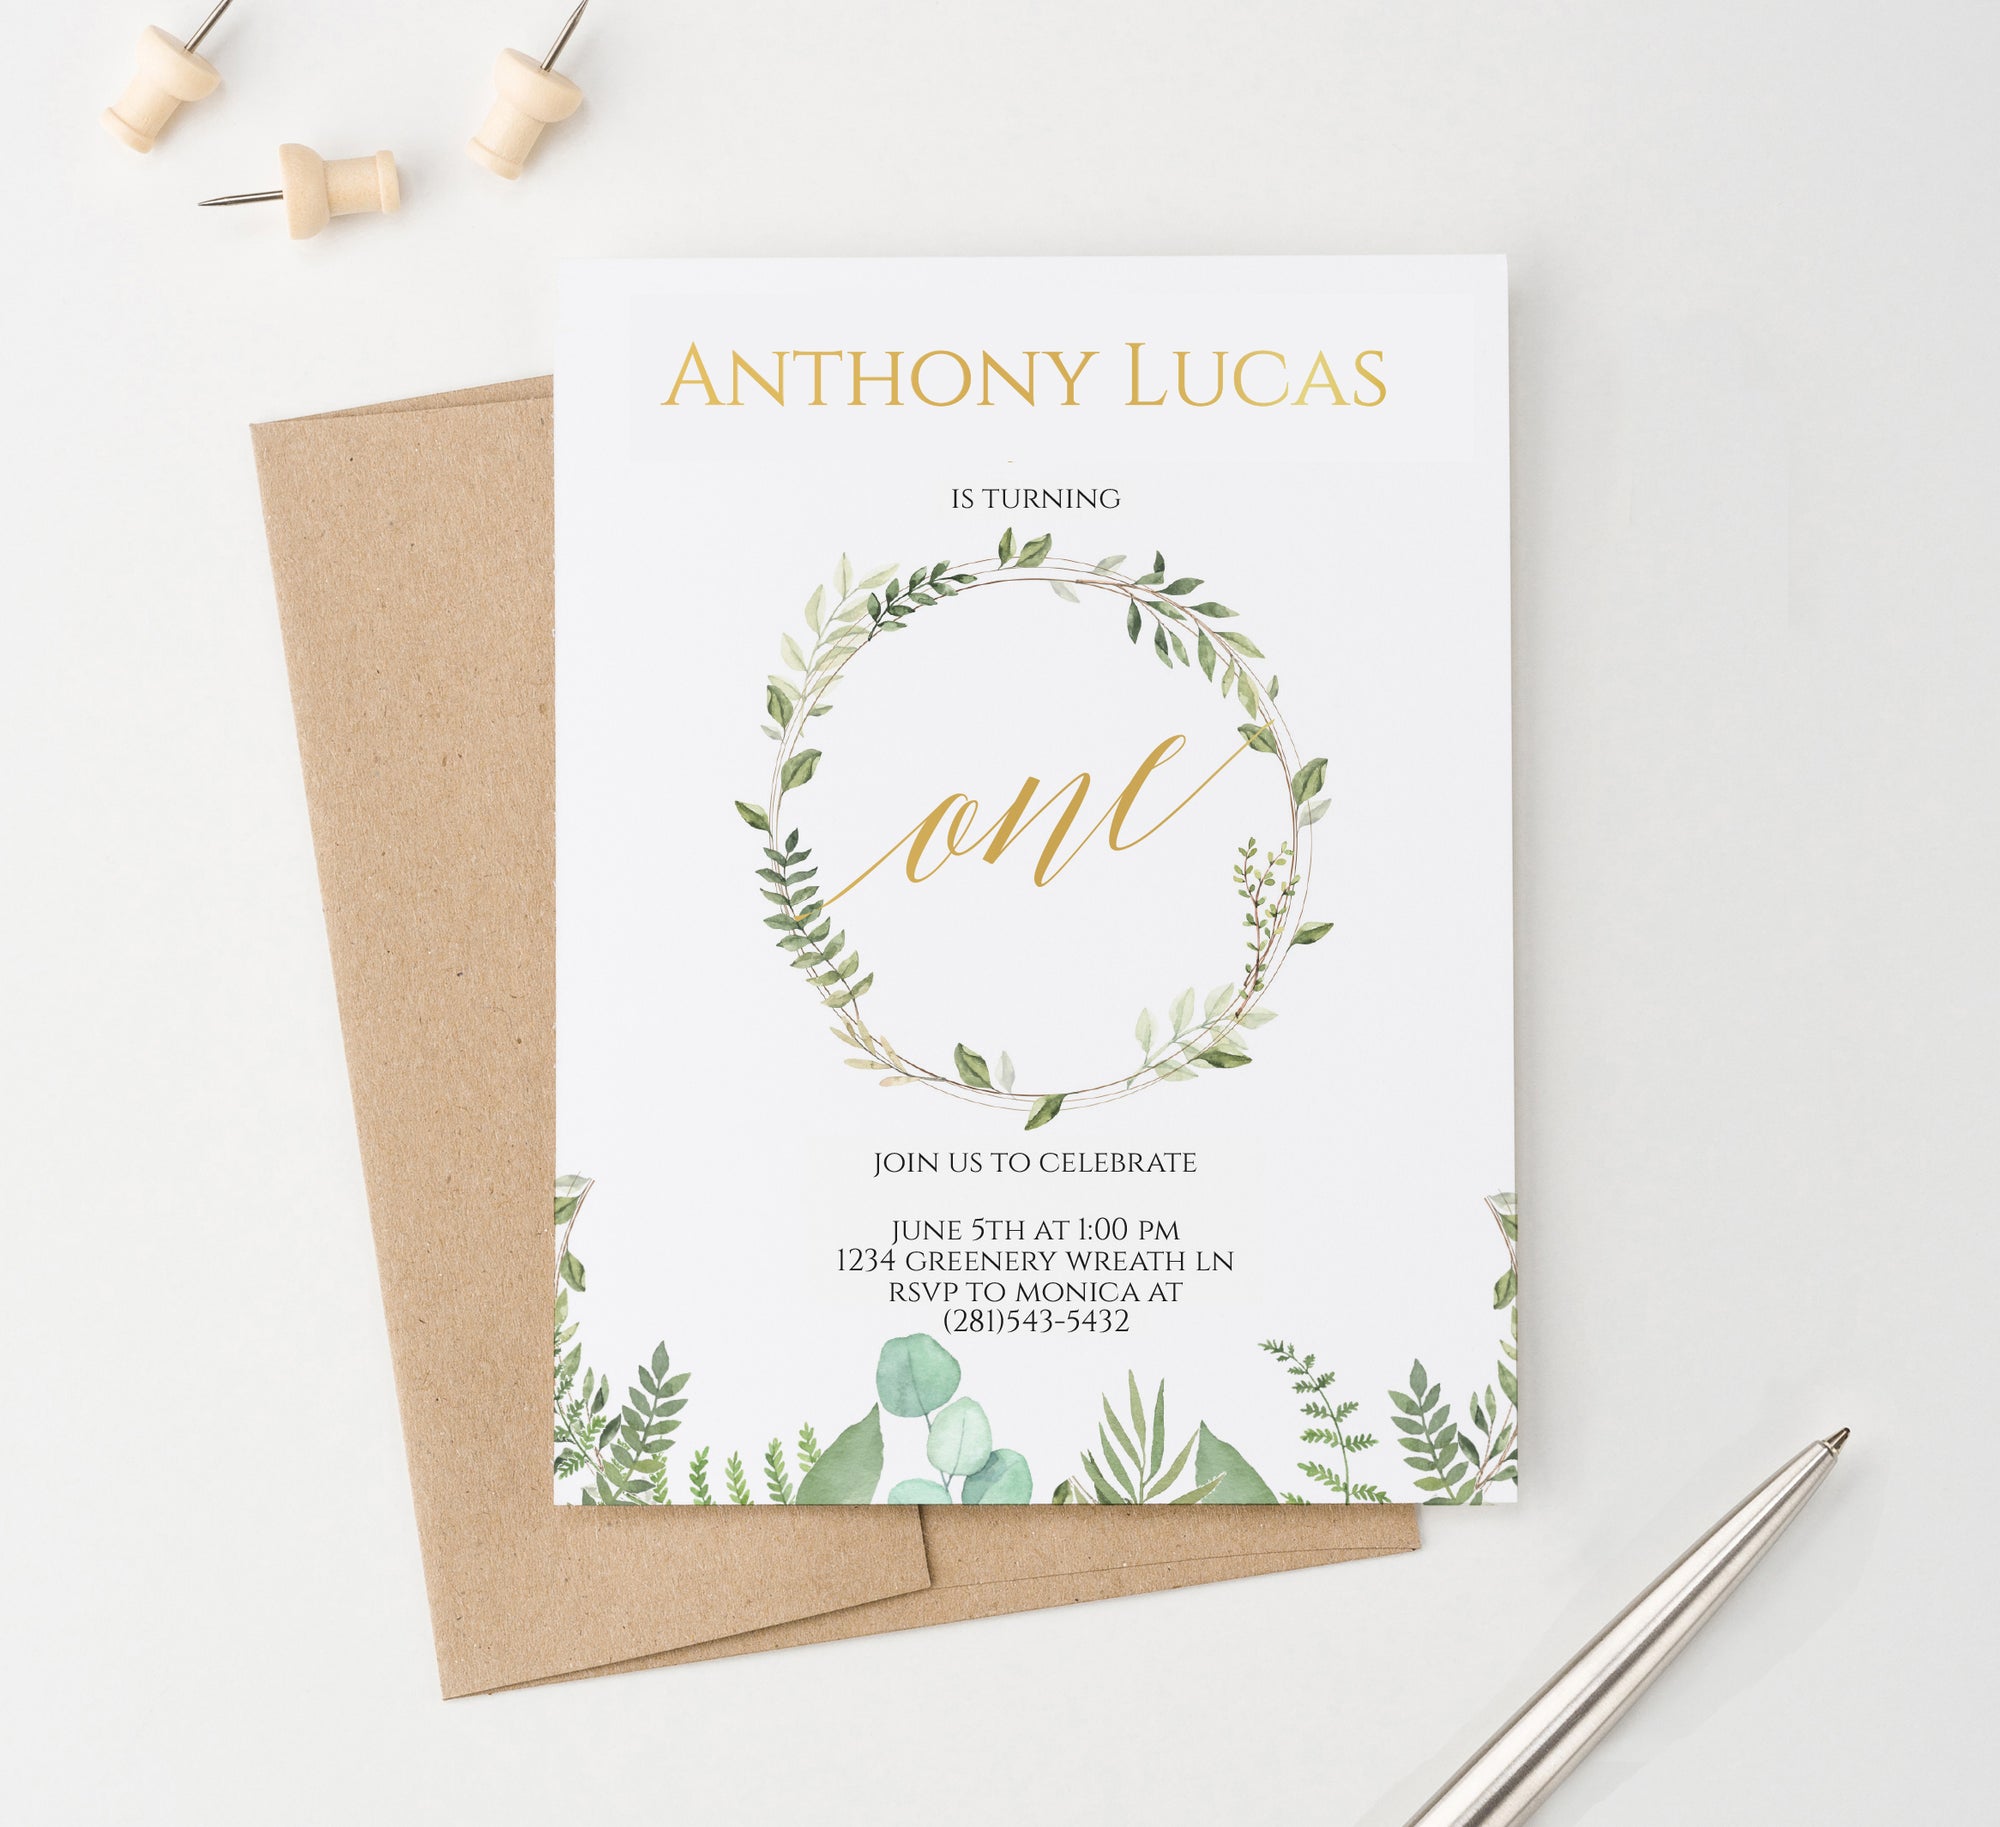 Personalized Greenery Wreath Birthday Party Invitations With Gold